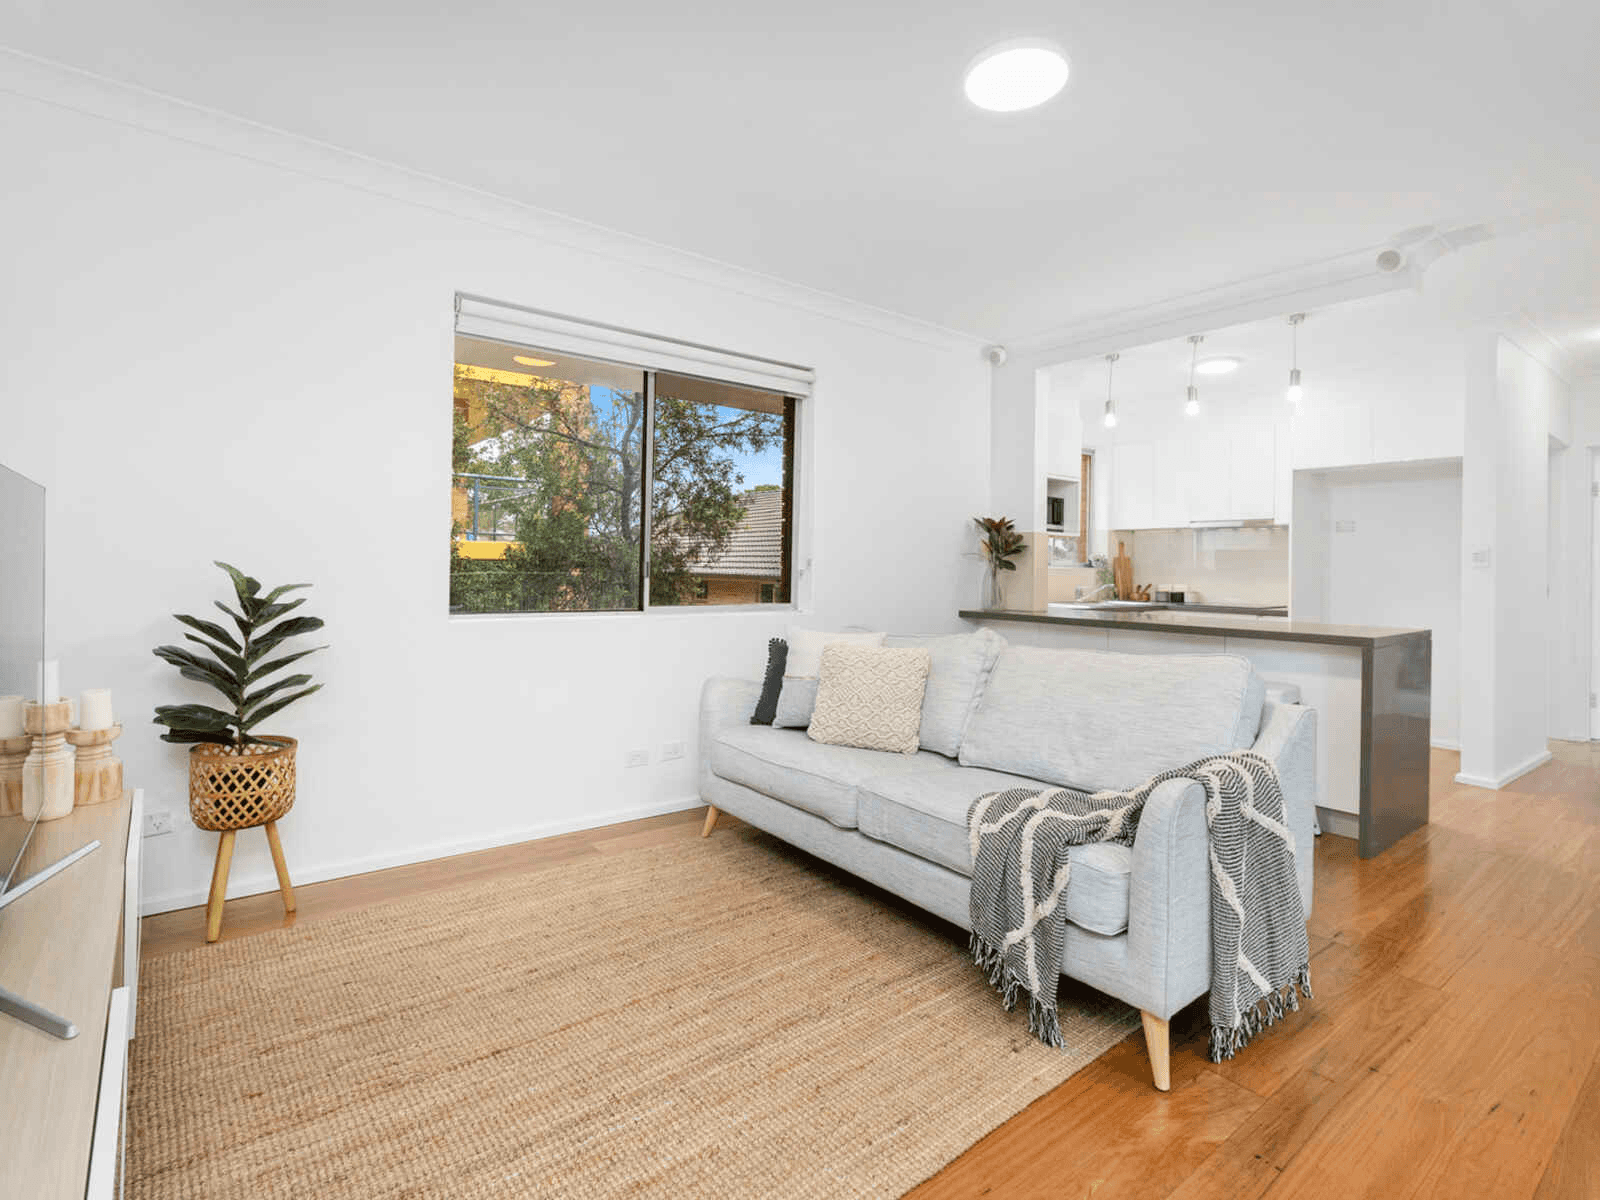 2/535 Victoria Road, Ryde, NSW 2112